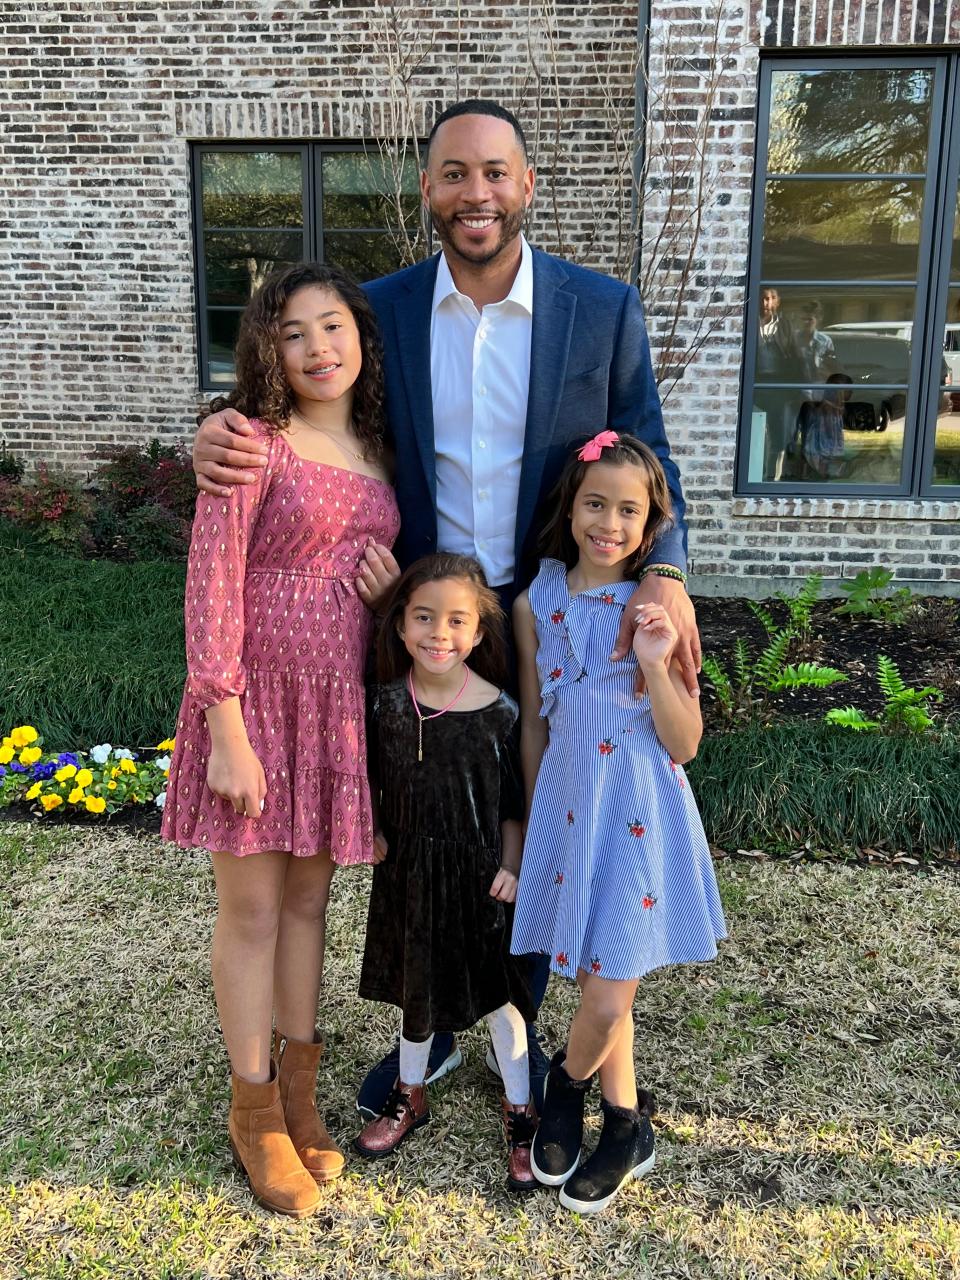 Former Wisconsin basketball star Devin Harris poses for a photo with his three daughters in Texas.